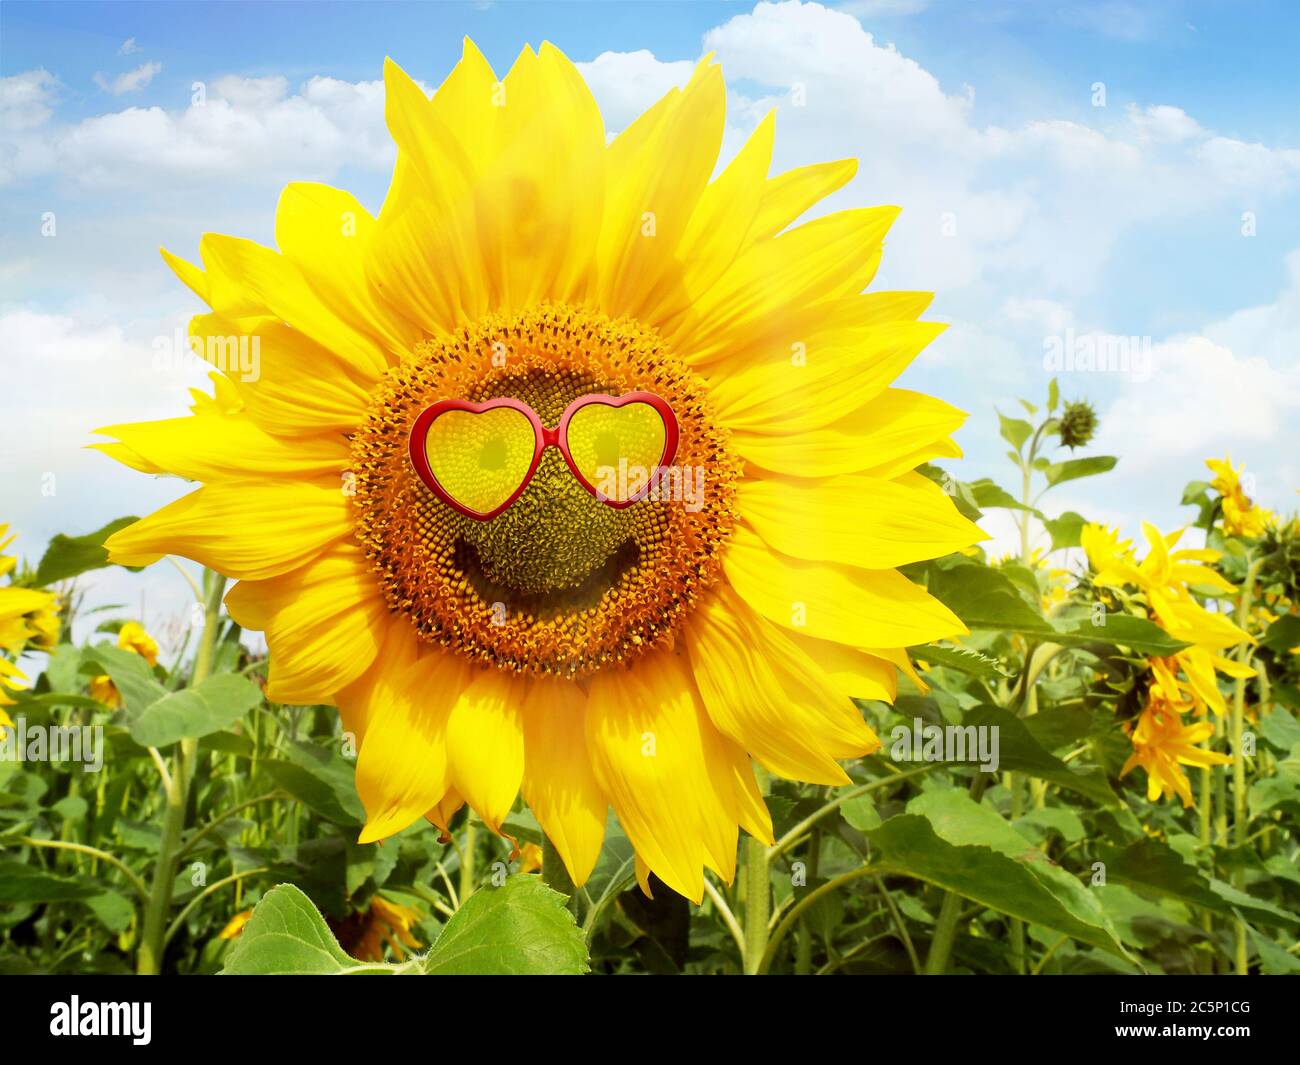 Sunflower on the Field - Smiling Face Stock Photo